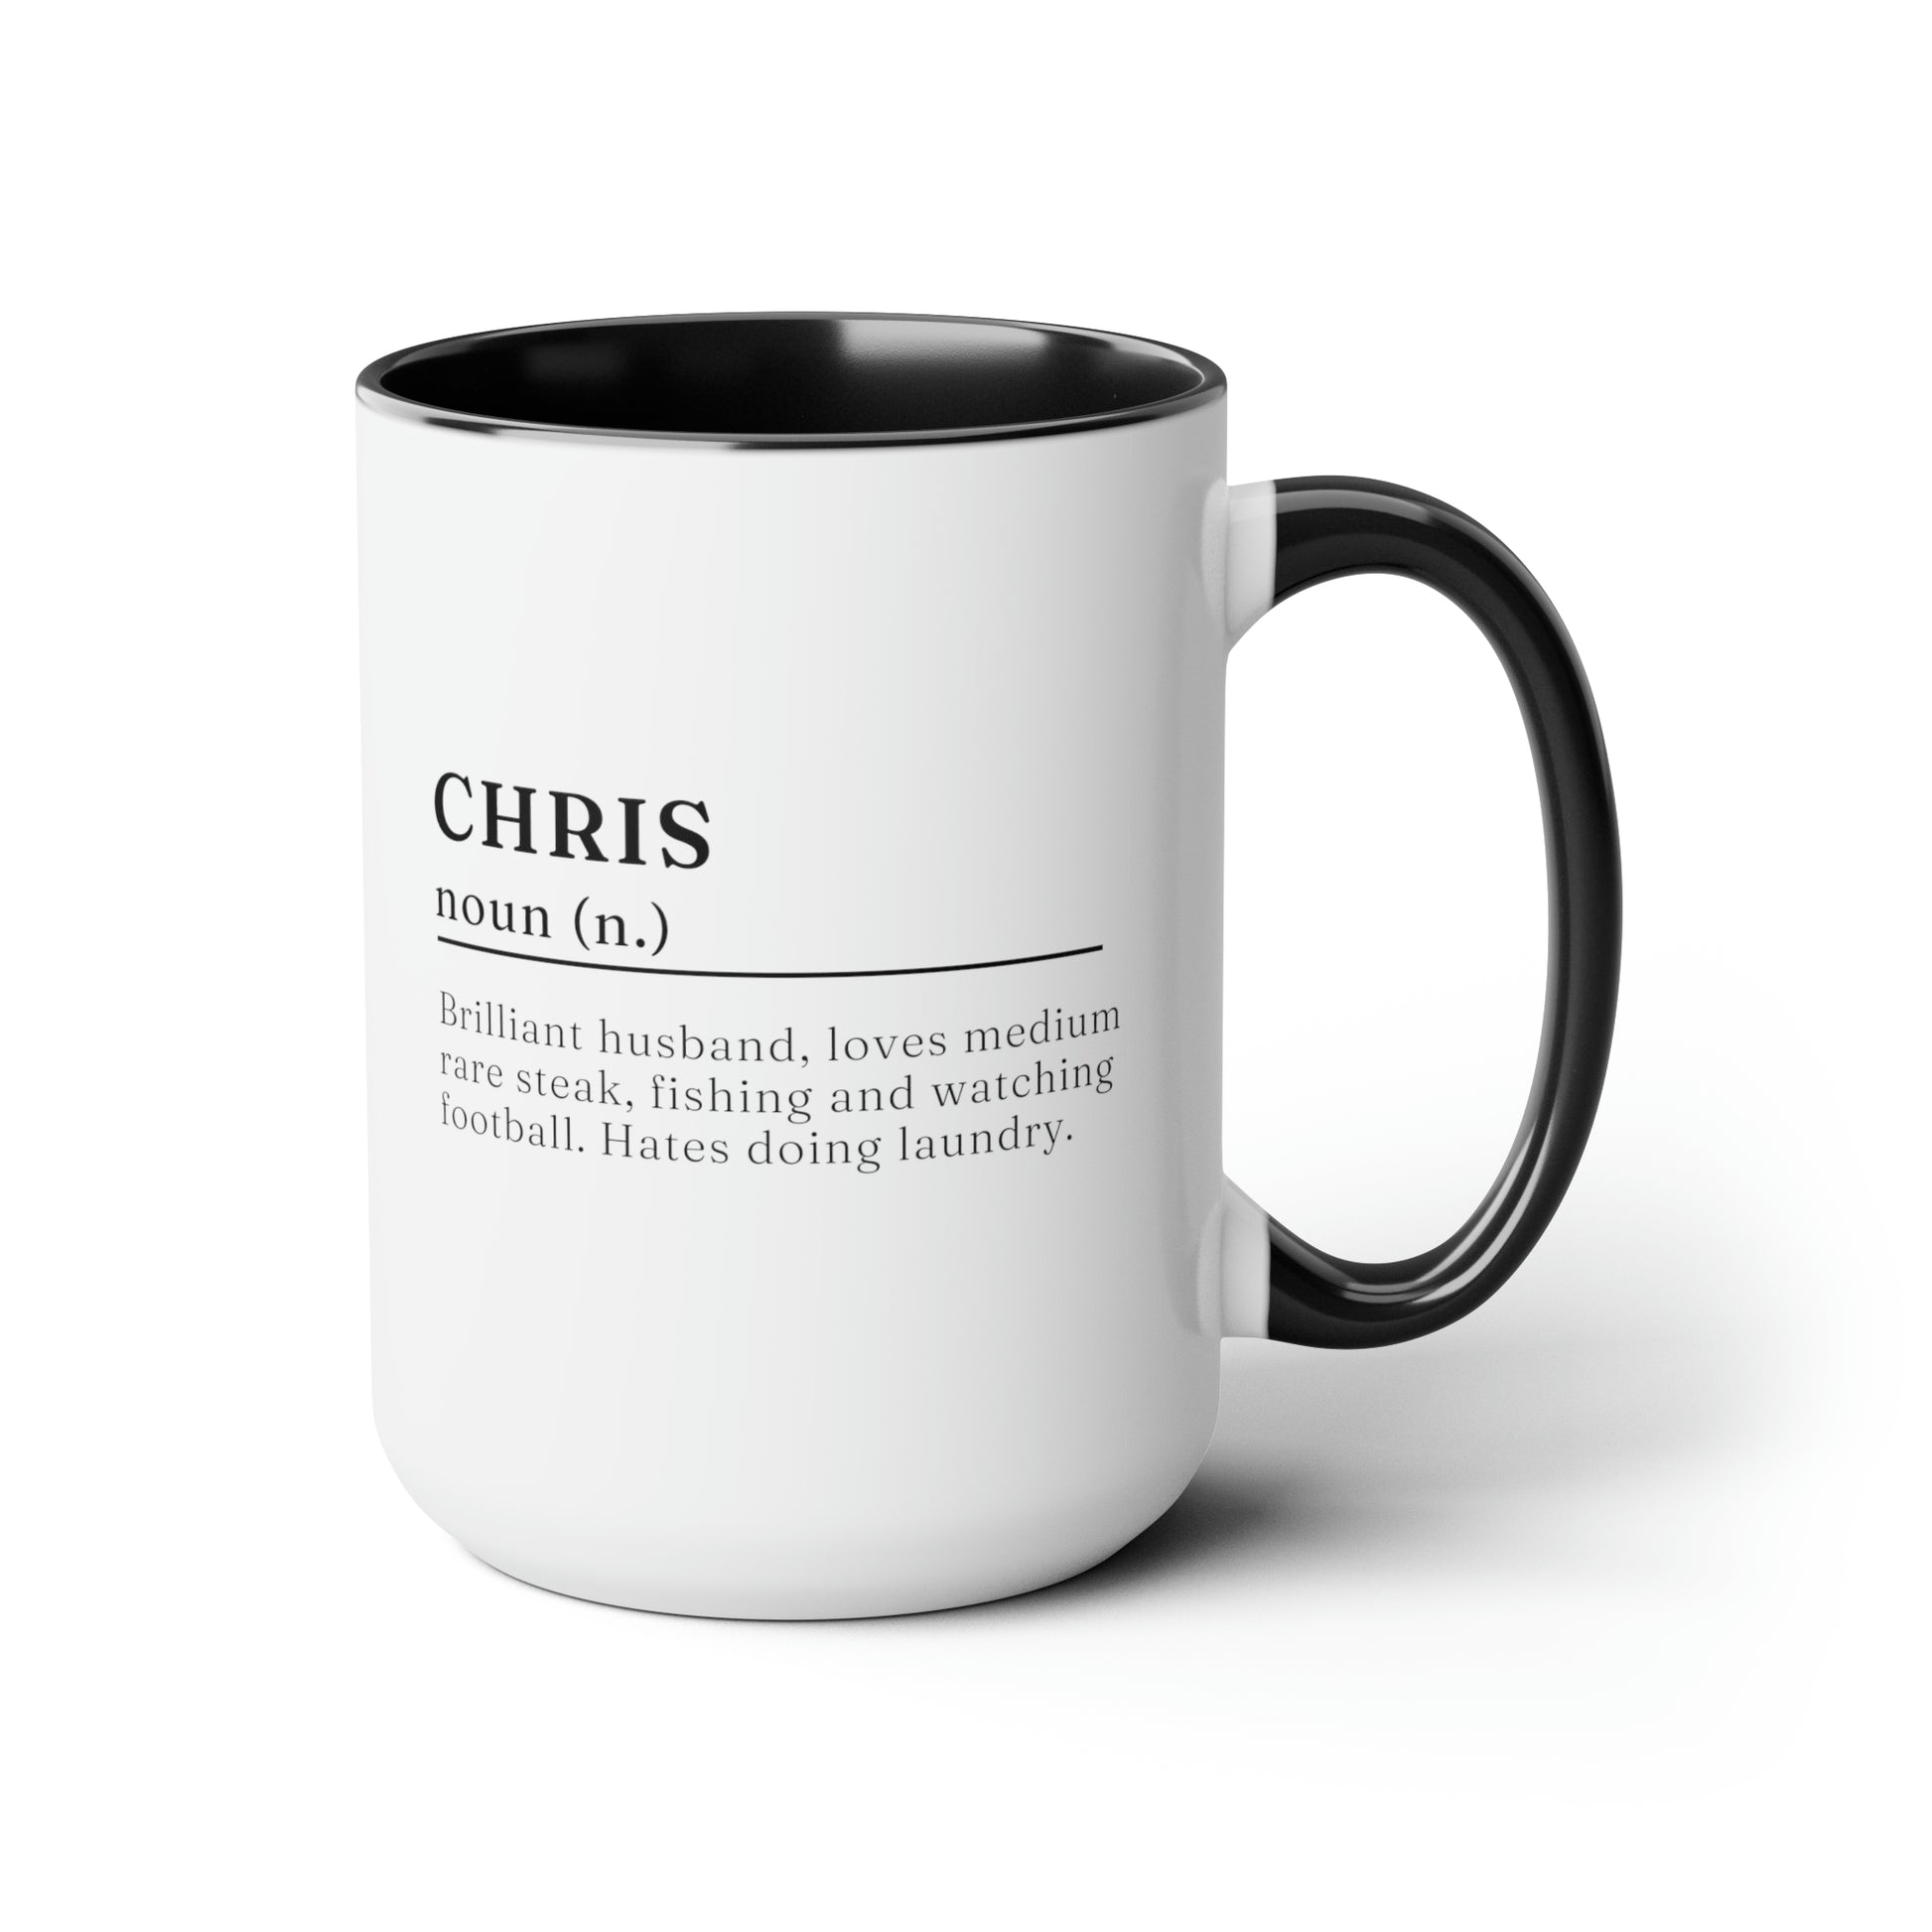 Name definition mug 15oz white with black accent funny large coffee mug gift for friends mom dad husband wife personalize with custom definition name meaning waveywares wavey wares wavywares wavy wares